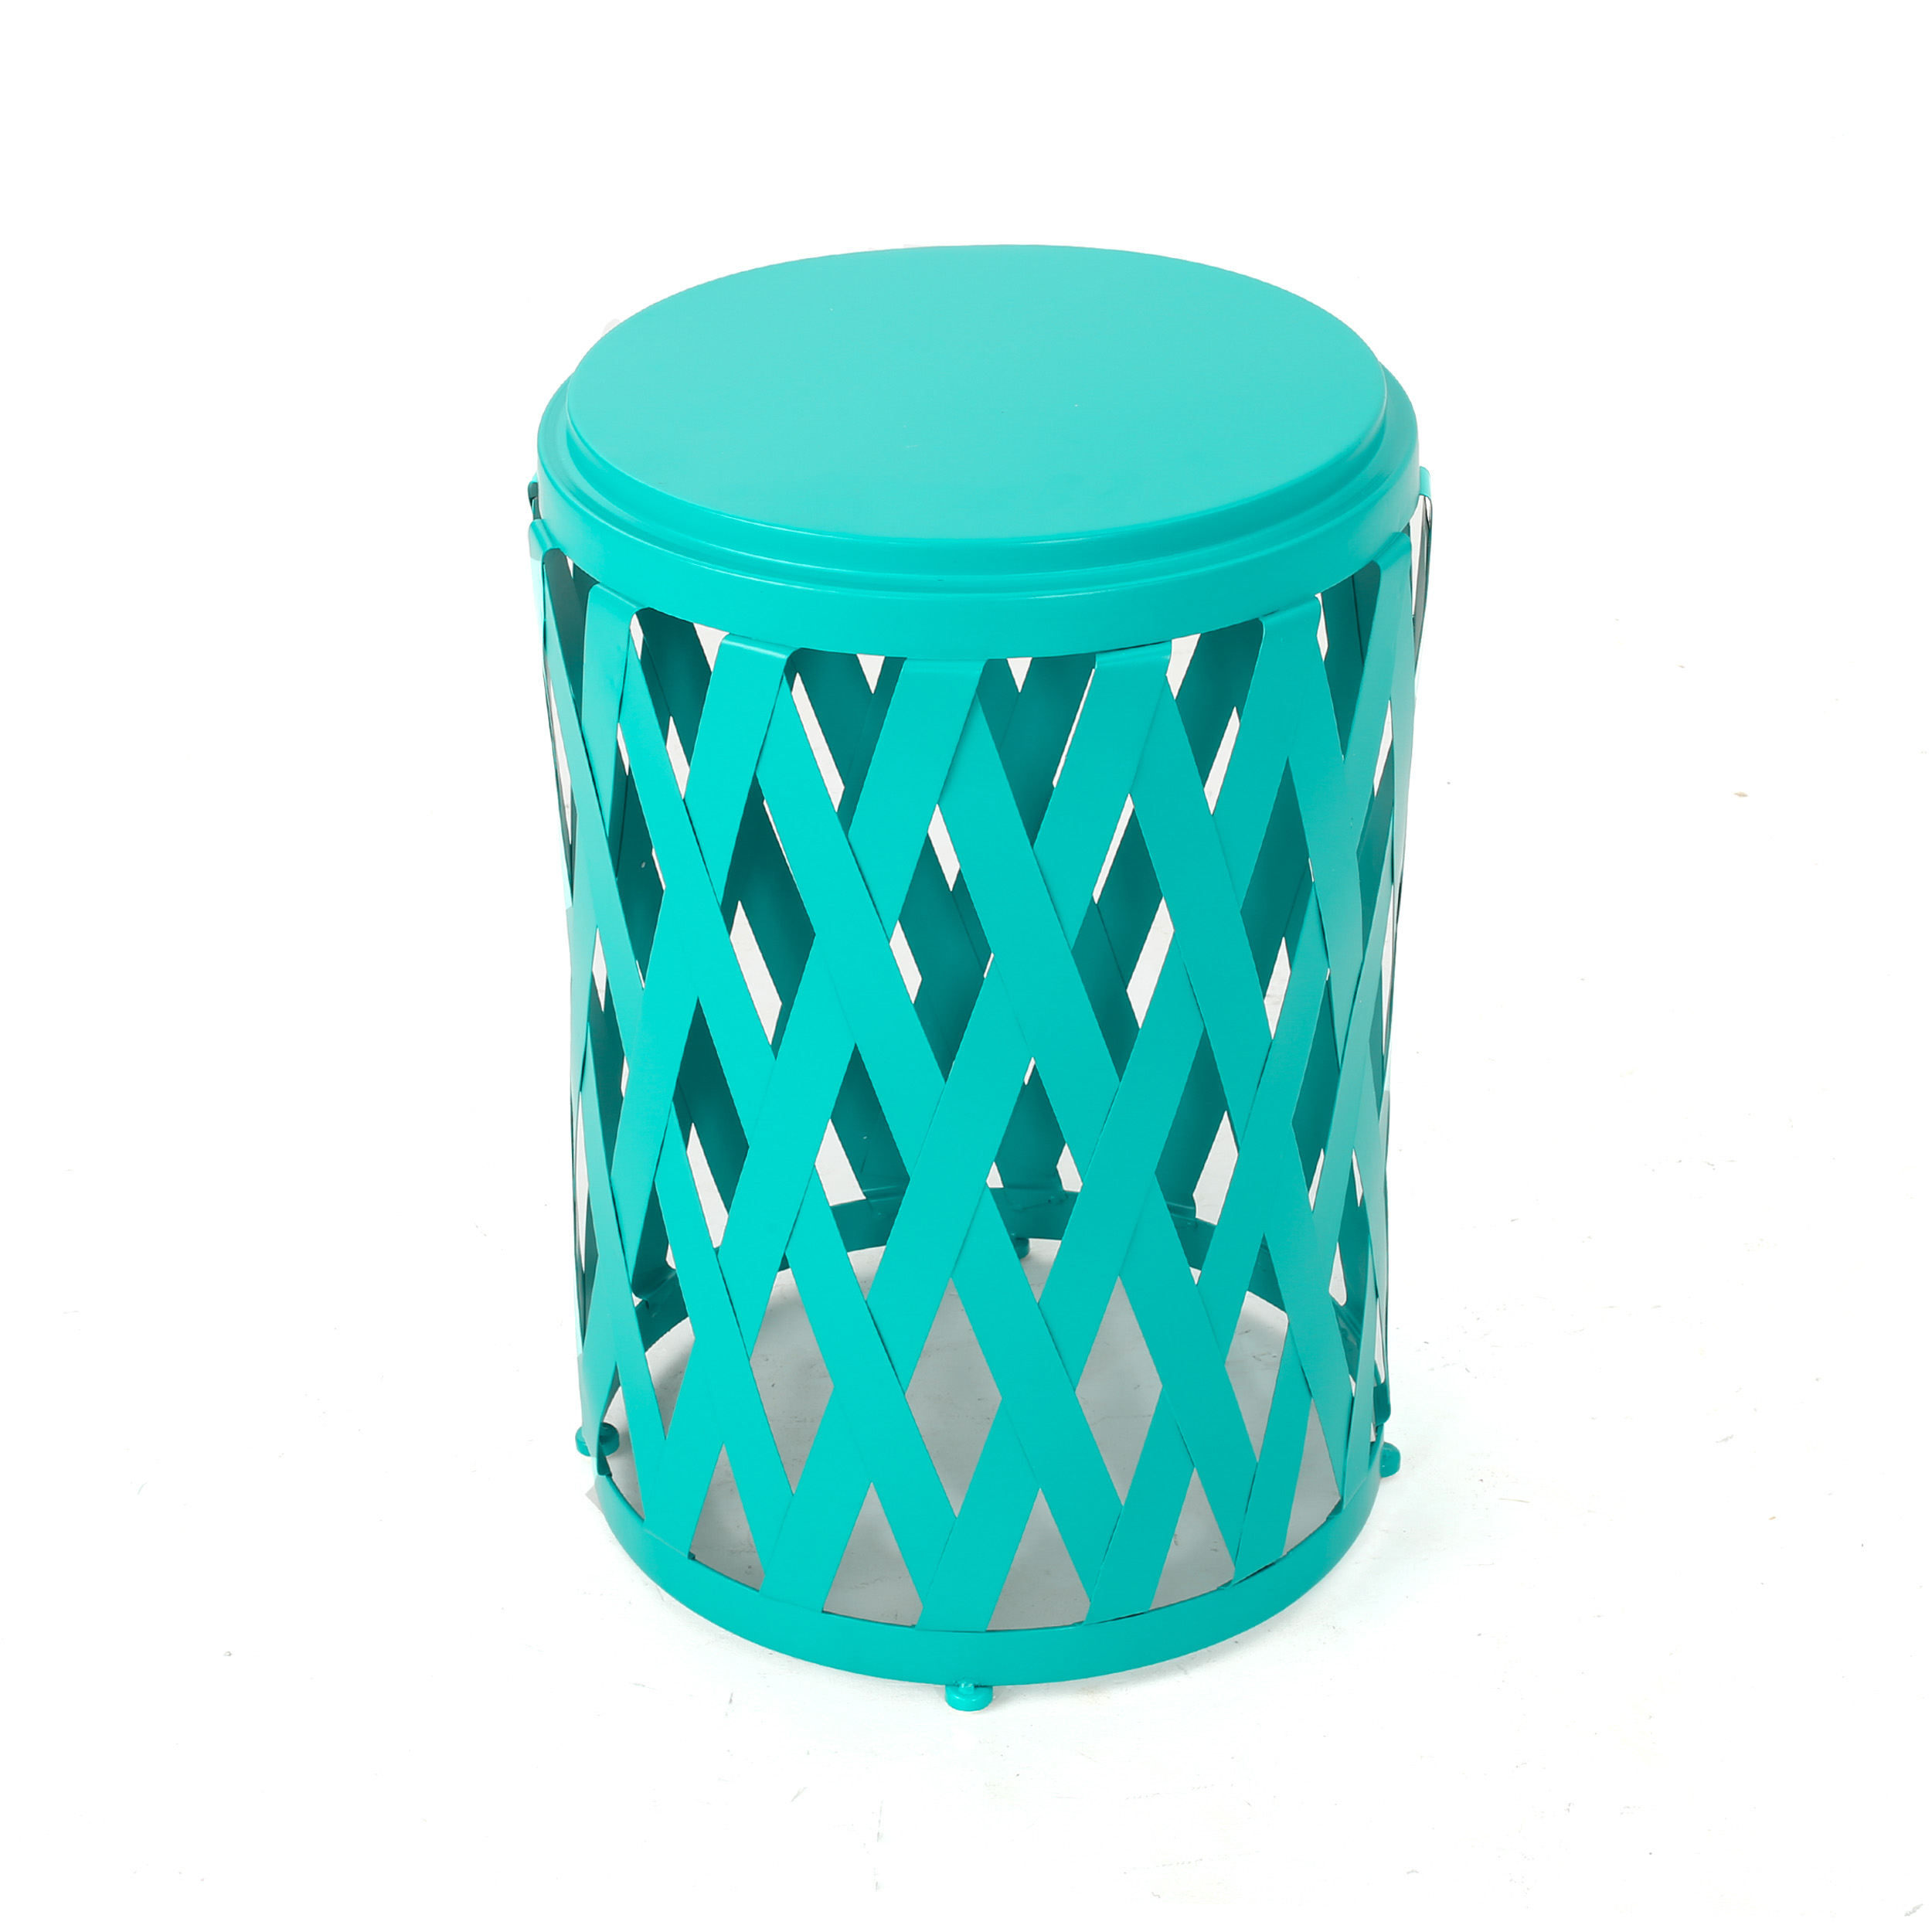 Aubriella Outdoor 14 Inch Diameter Iron Side Table, Teal - image 4 of 4